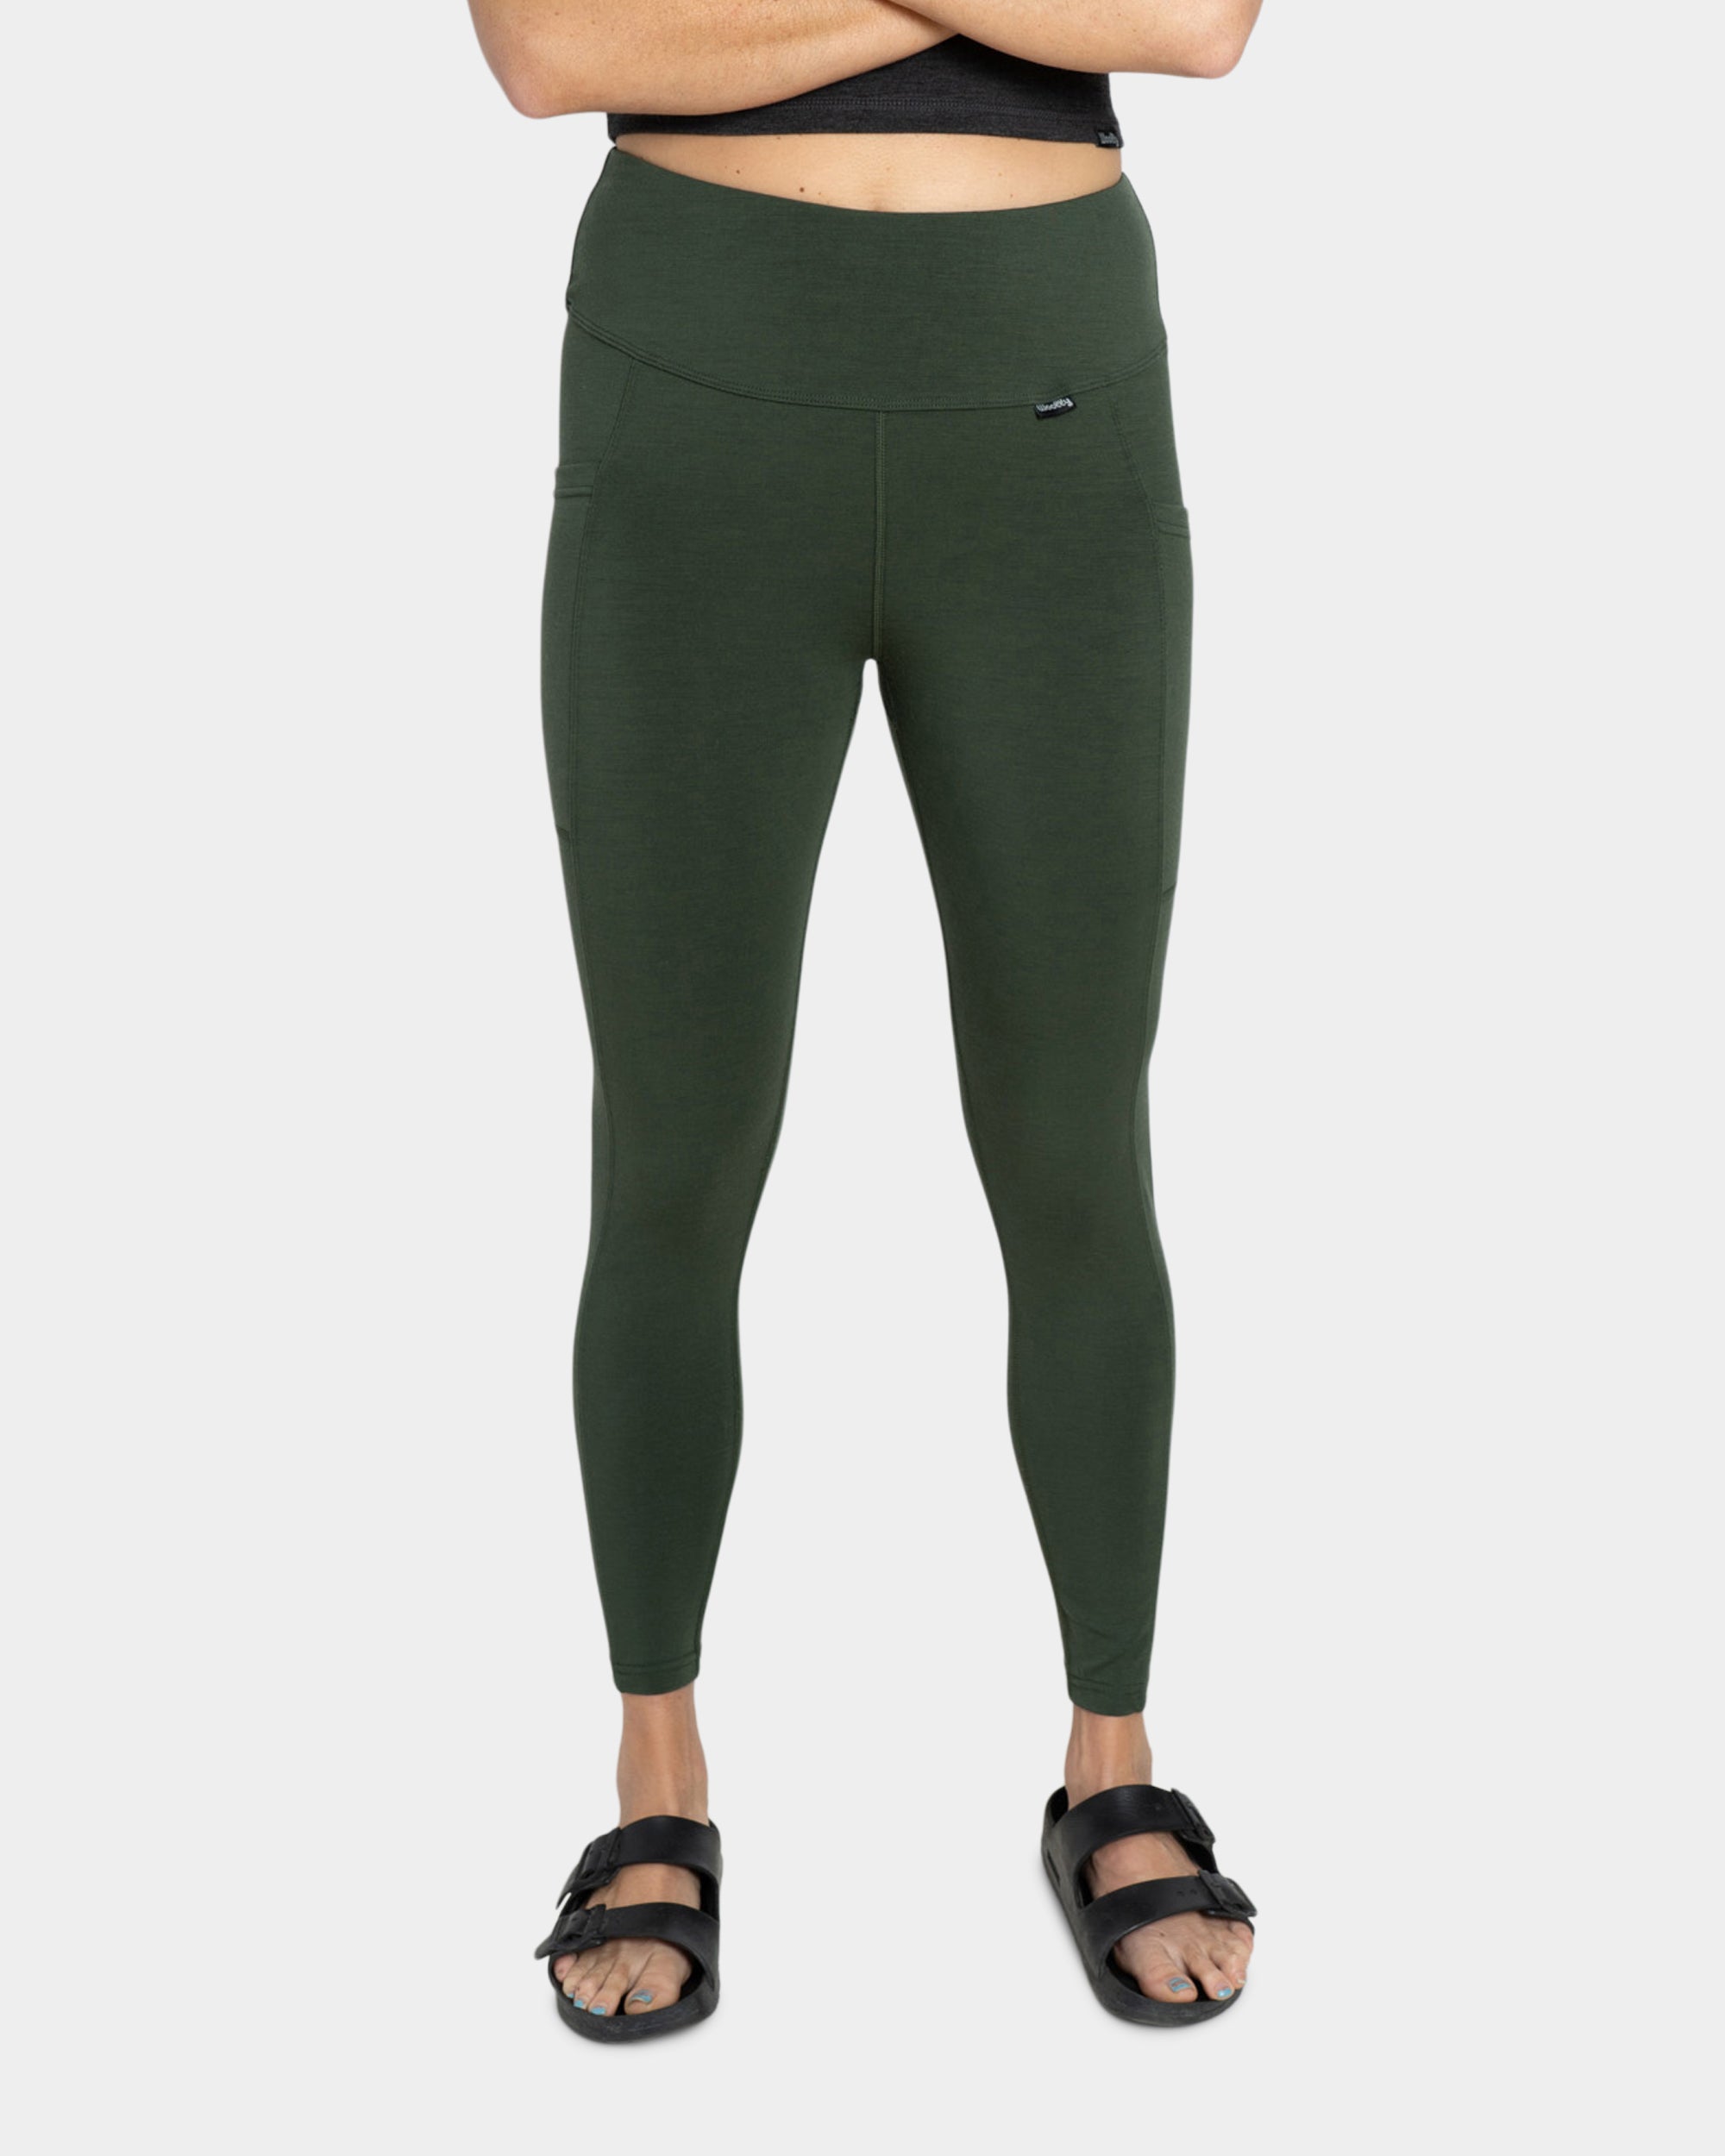 Lululemon tight stuff tight  Leggings are not pants, Clothes design,  Clothes